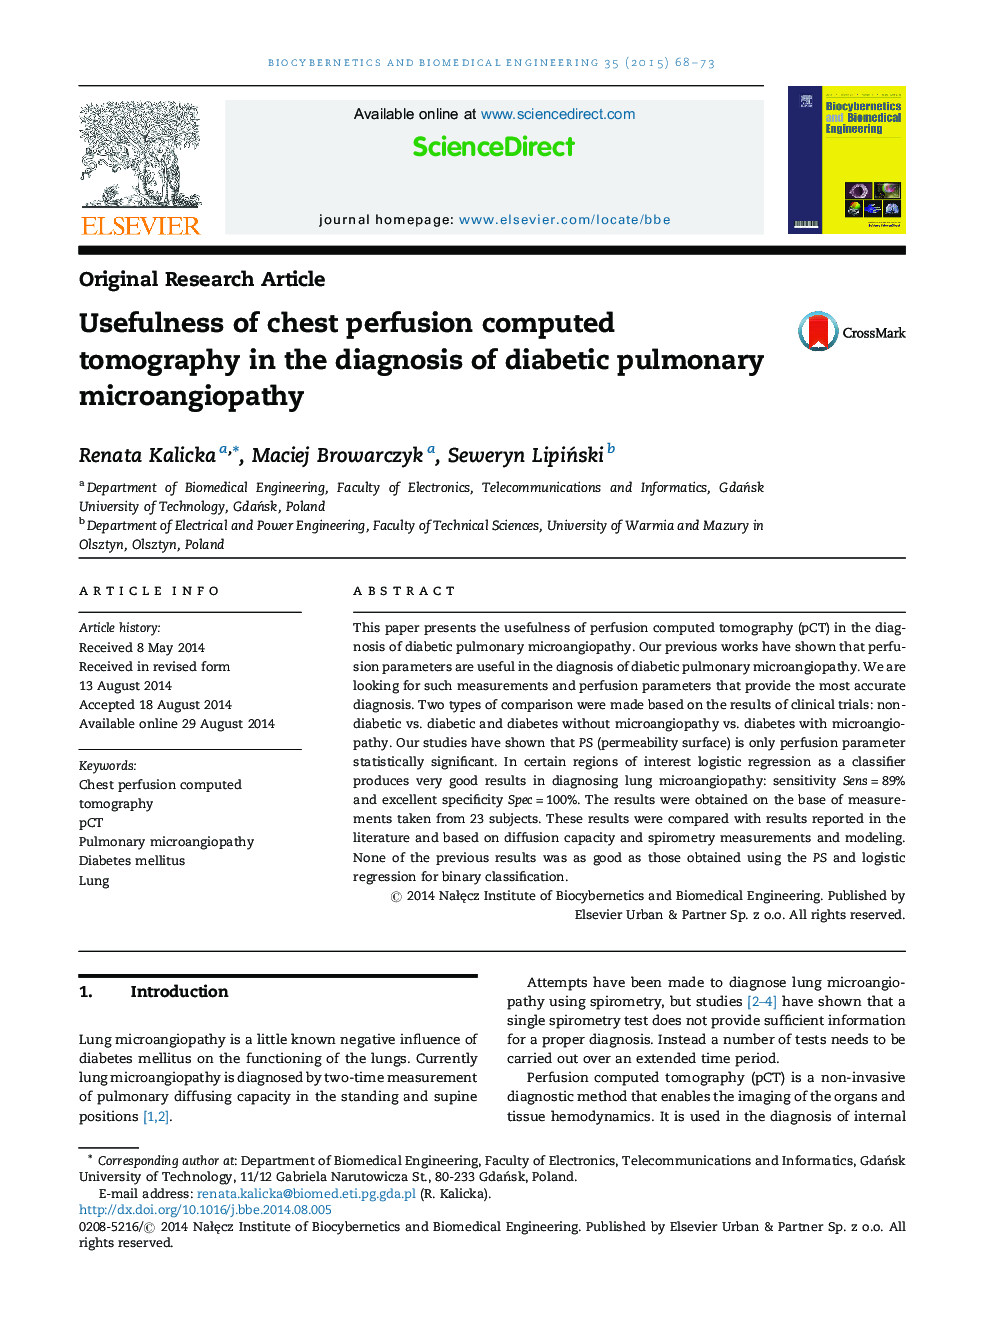 Usefulness of chest perfusion computed tomography in the diagnosis of diabetic pulmonary microangiopathy